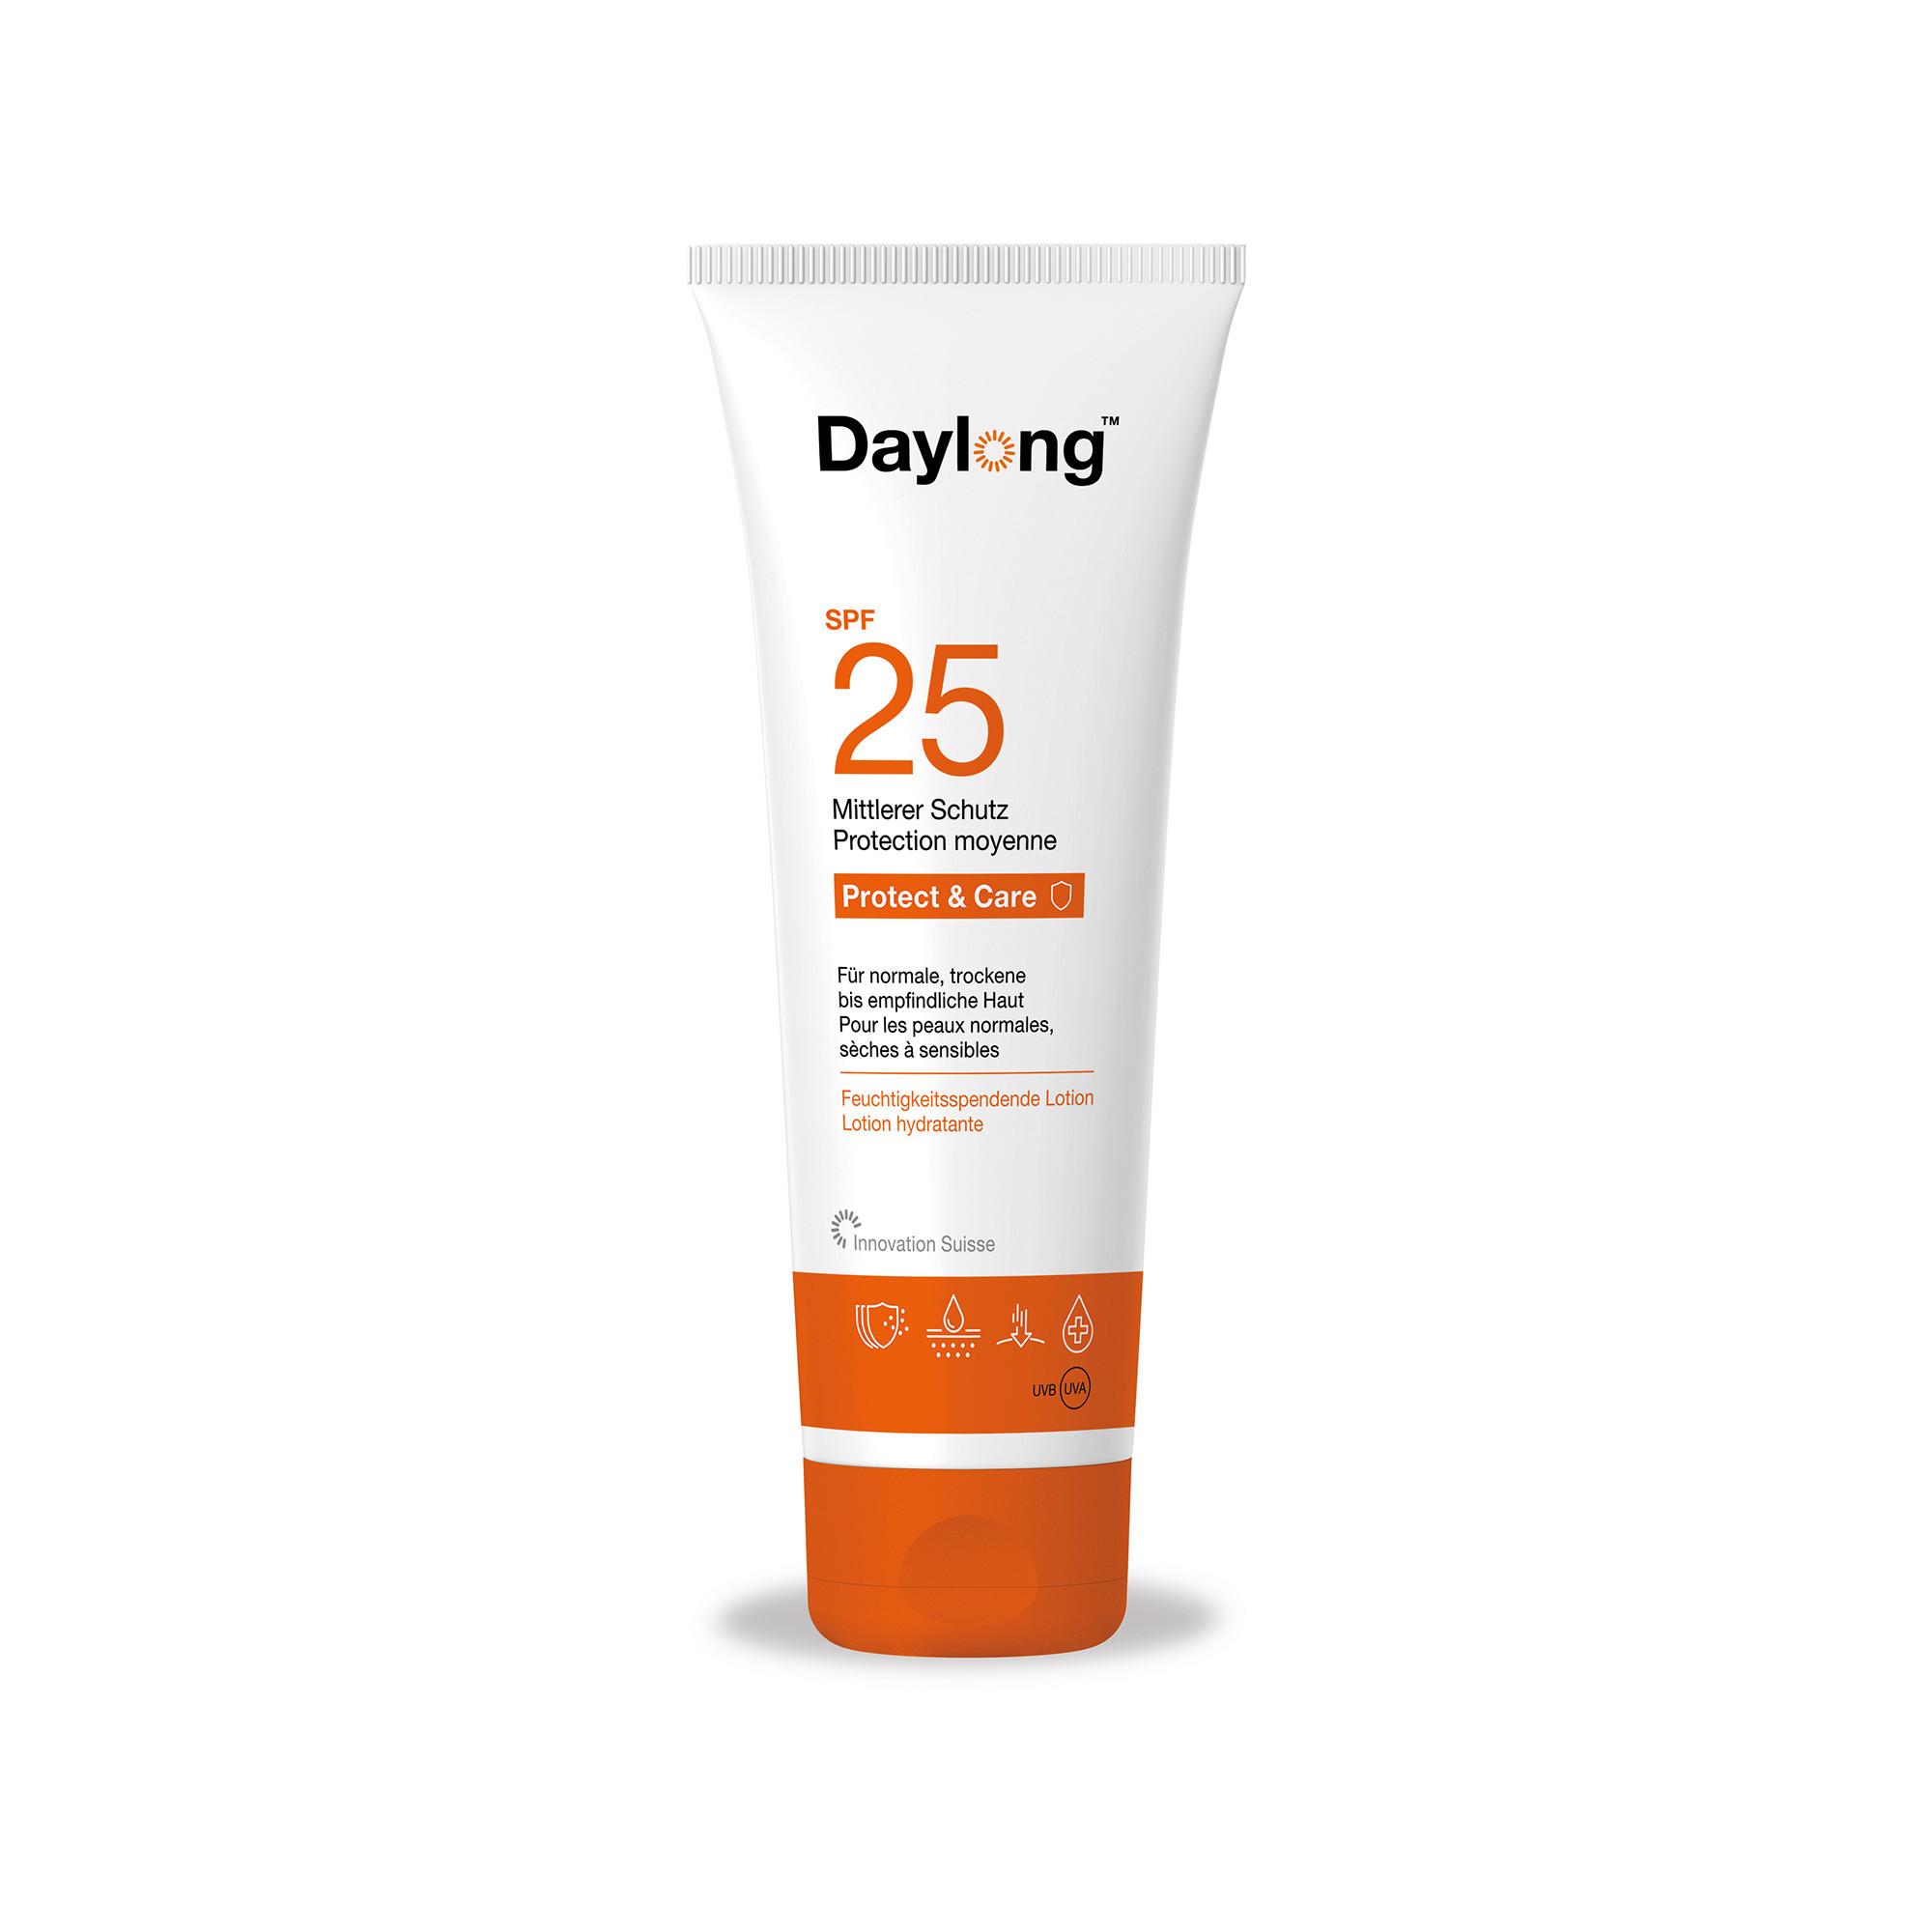 Image of Daylong Protect & Care Lotion SPF 25 - 100 ml